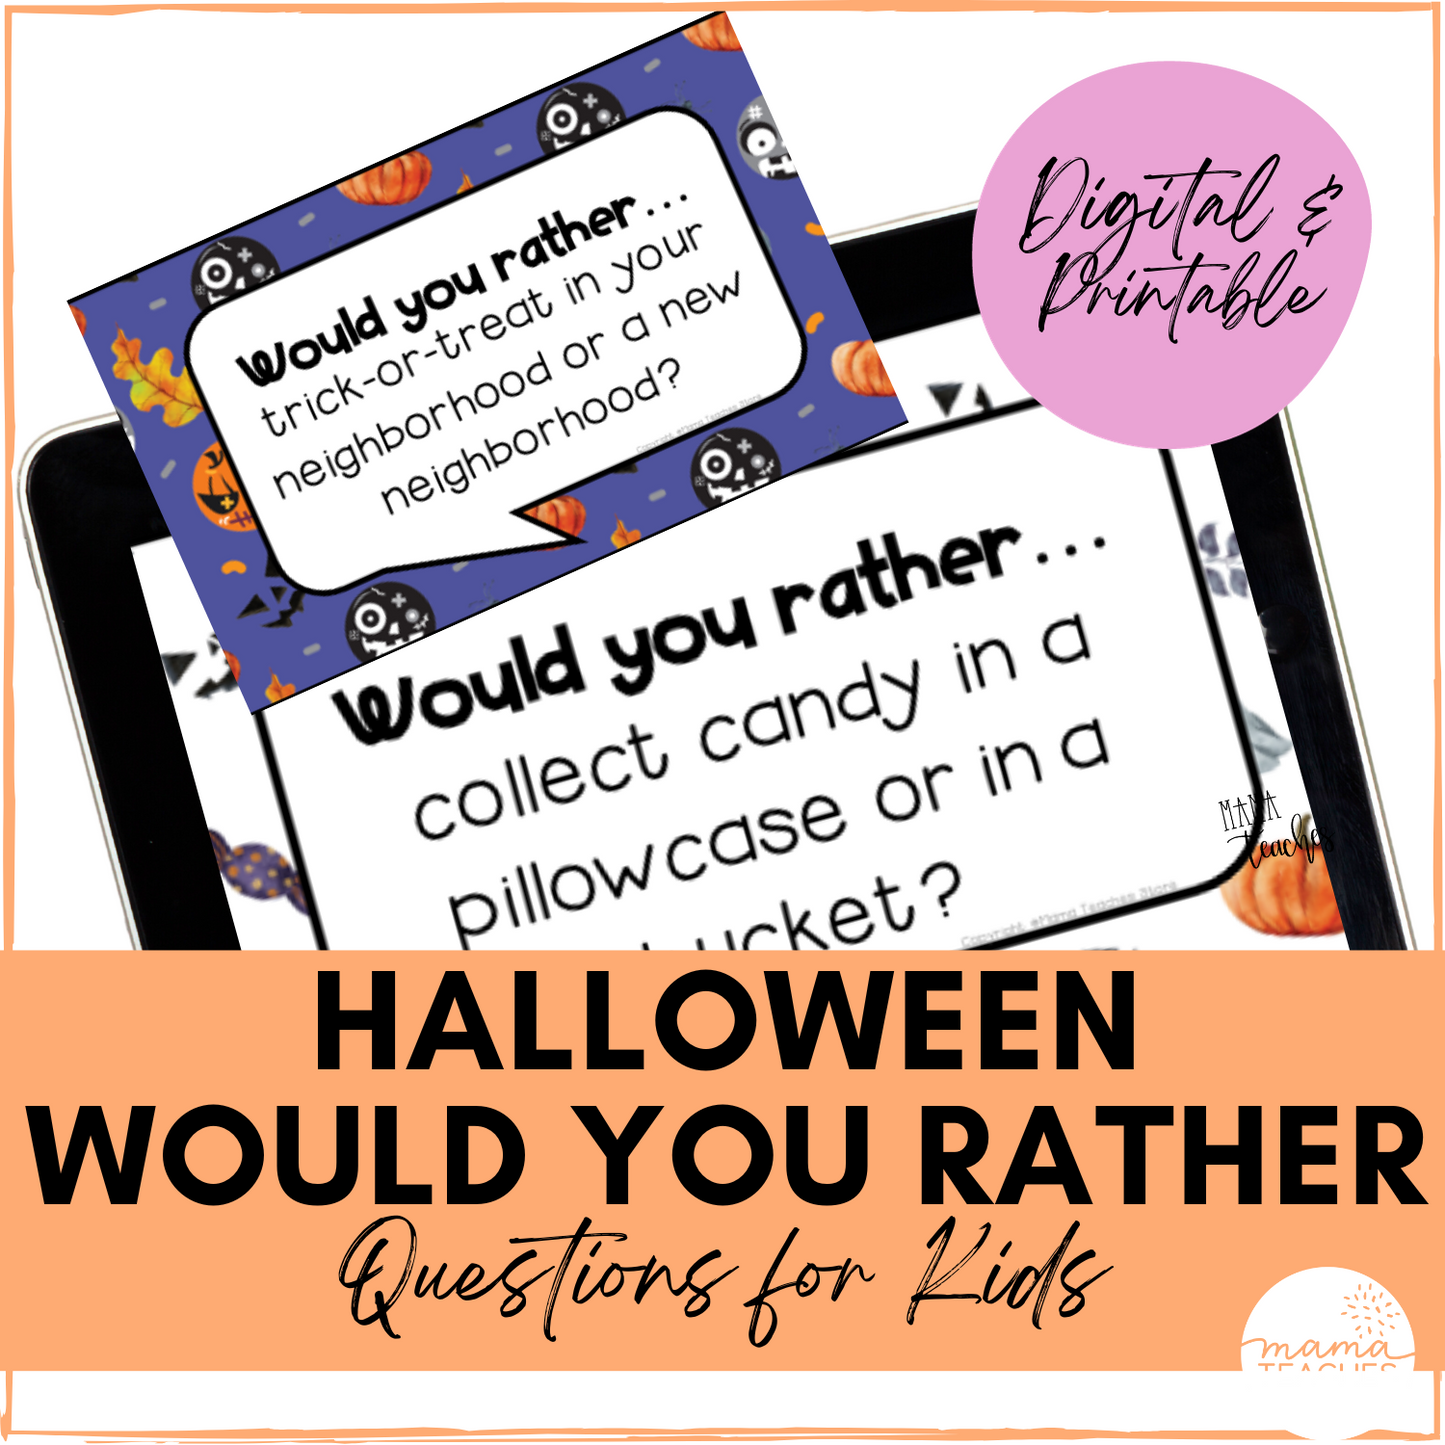 Halloween Would You Rather Questions * Digital & Print Attendance Questions